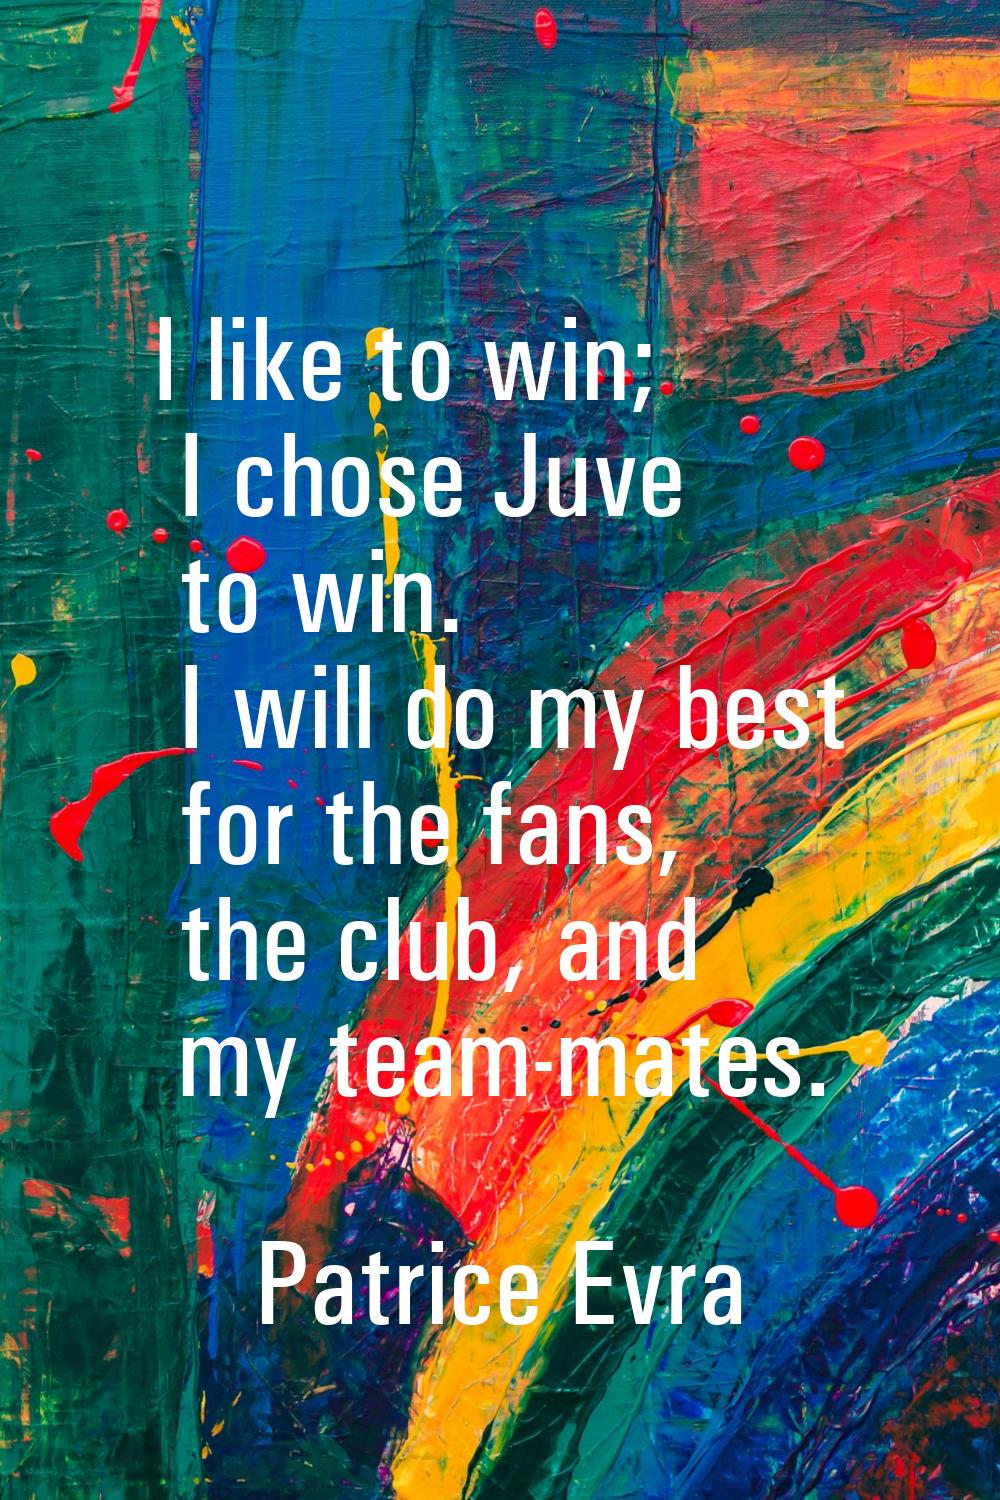 I like to win; I chose Juve to win. I will do my best for the fans, the club, and my team-mates.